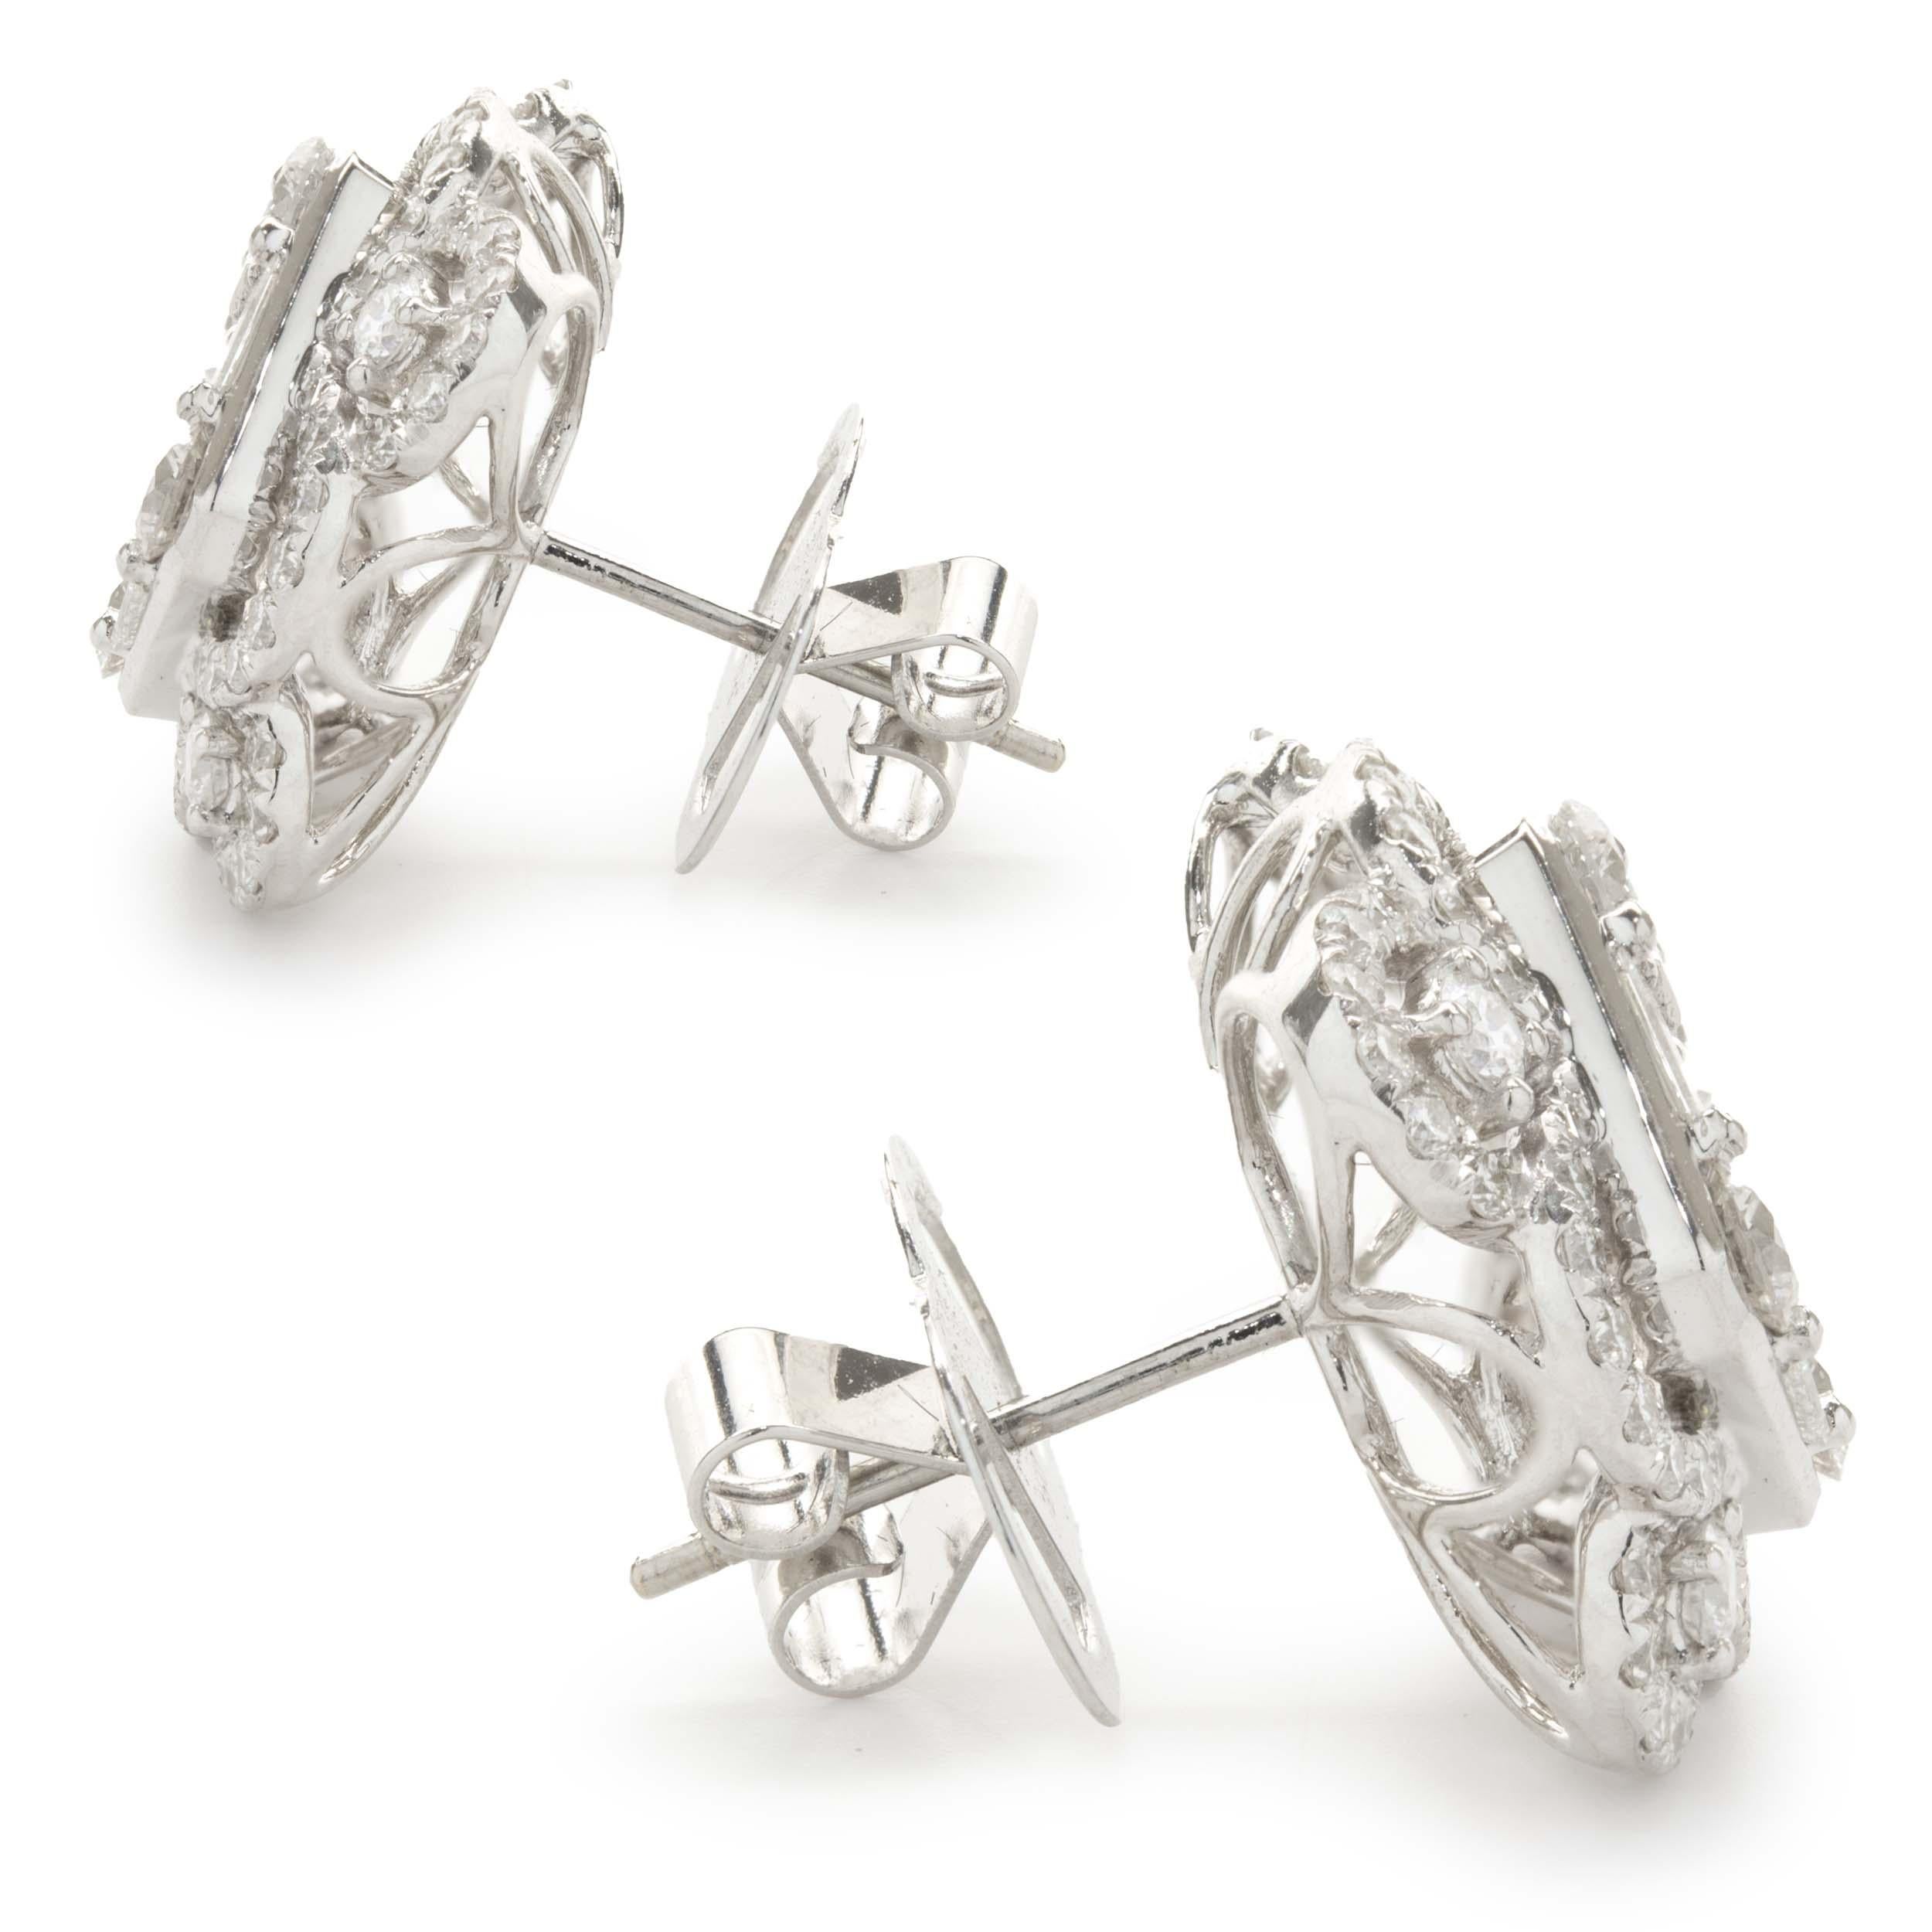 Designer: custom
Material: 18K white gold
Diamond: 124 round brilliant cut = 2.24cttw
Color: G
Clarity: SI1
Diamond: 20 baguette cut = 1.19cttw
Color: G
Clarity: SI1
Dimensions: earrings measure 19.4mm in length
Fastenings: post with